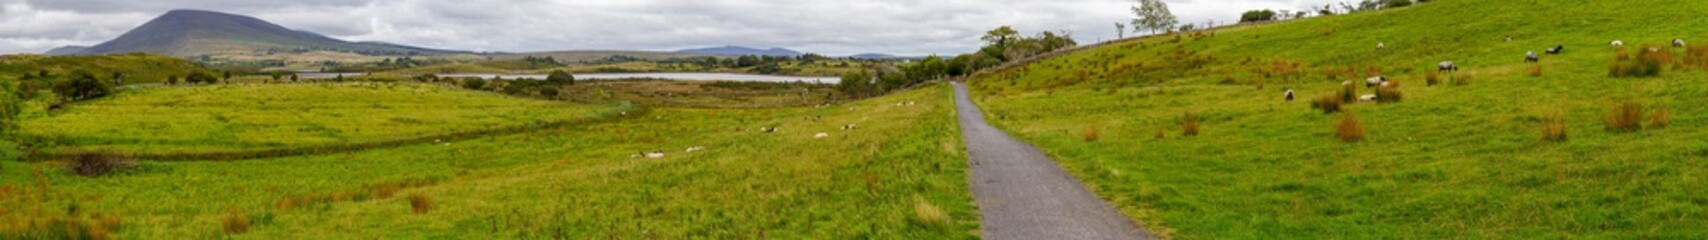 Fototapeta na wymiar Panorama with sheep herd in a farm, lake and mountains in background, Great Western Greenway trail